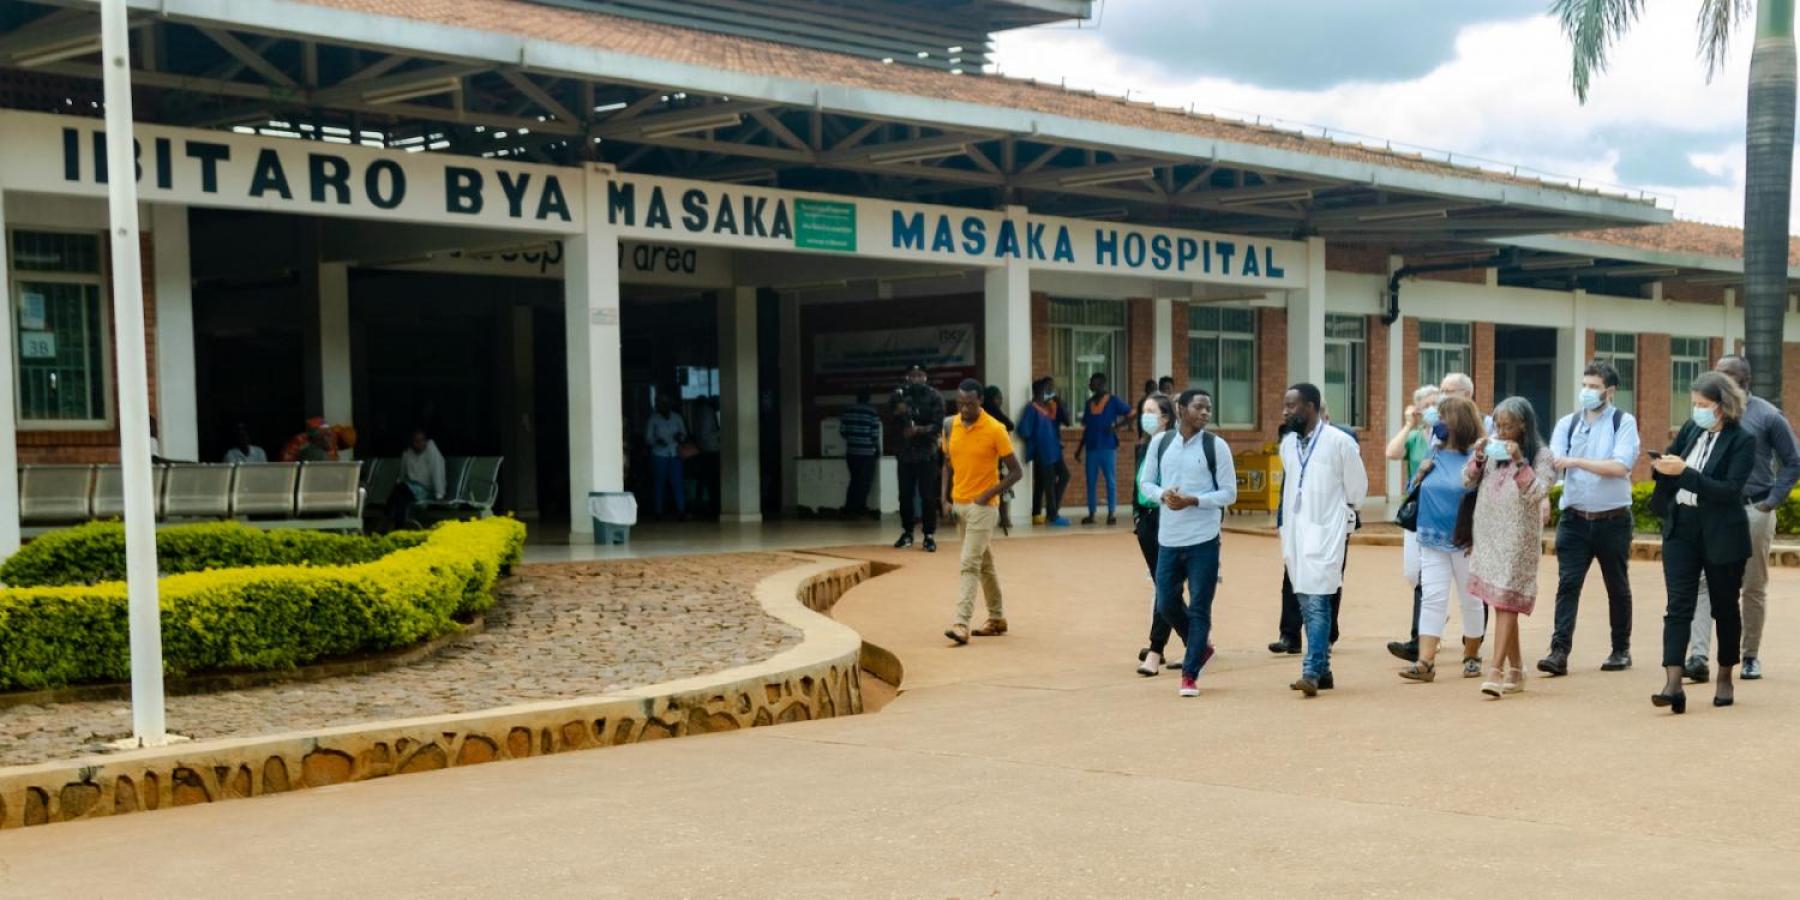 NCD Alliance Board members visit the Masaka District Hospital in Kigali. March 2023.